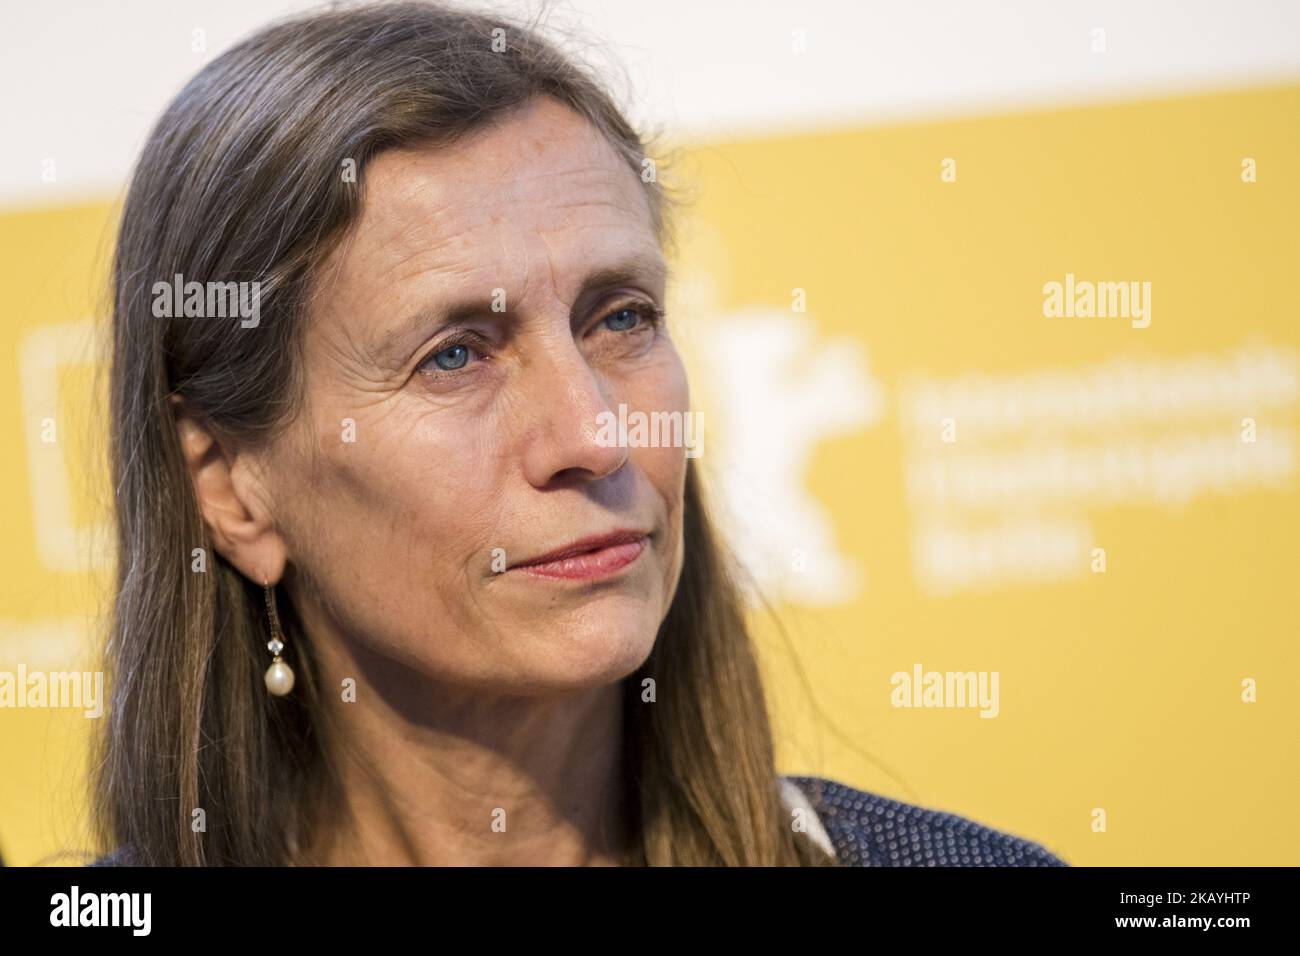 Dutch Mariette Rissenbeek is pictured during a press conference in Berlin, Germany on June 22, 2018. Rissenbeek has been nominated managing director of the Berlinale Film Festival and will succeed (in a duo with Italian Carlo Chatrian in the role of artistic director) Dieter Kosslick starting her activity 2020. (Photo by Emmanuele Contini/NurPhoto) Stock Photo